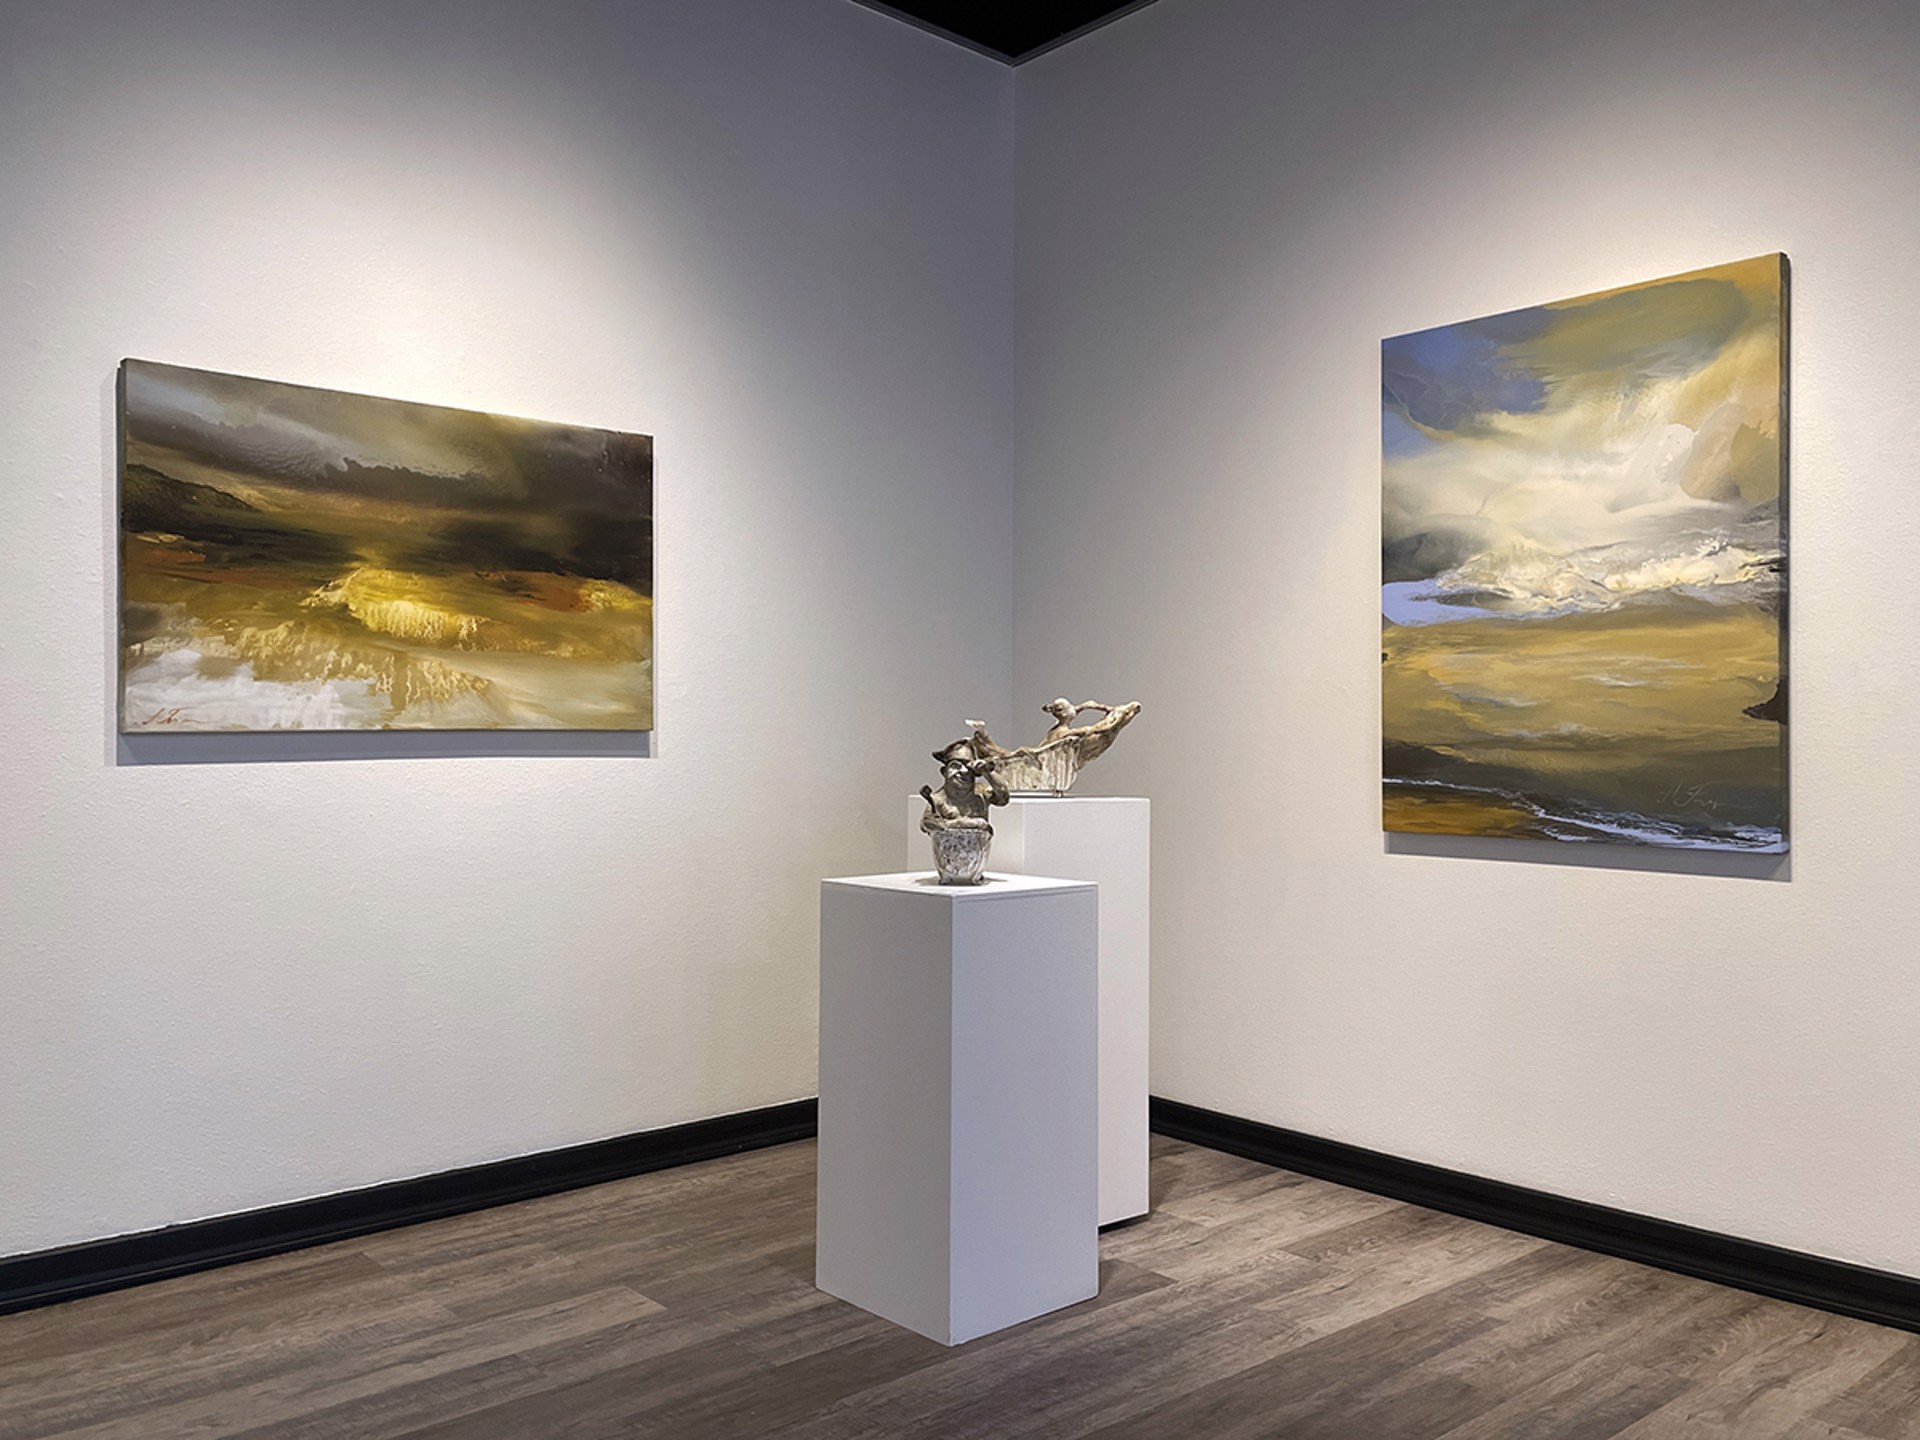 Two abstract paintings on a white wall and pedestals with small sculpture in between them.